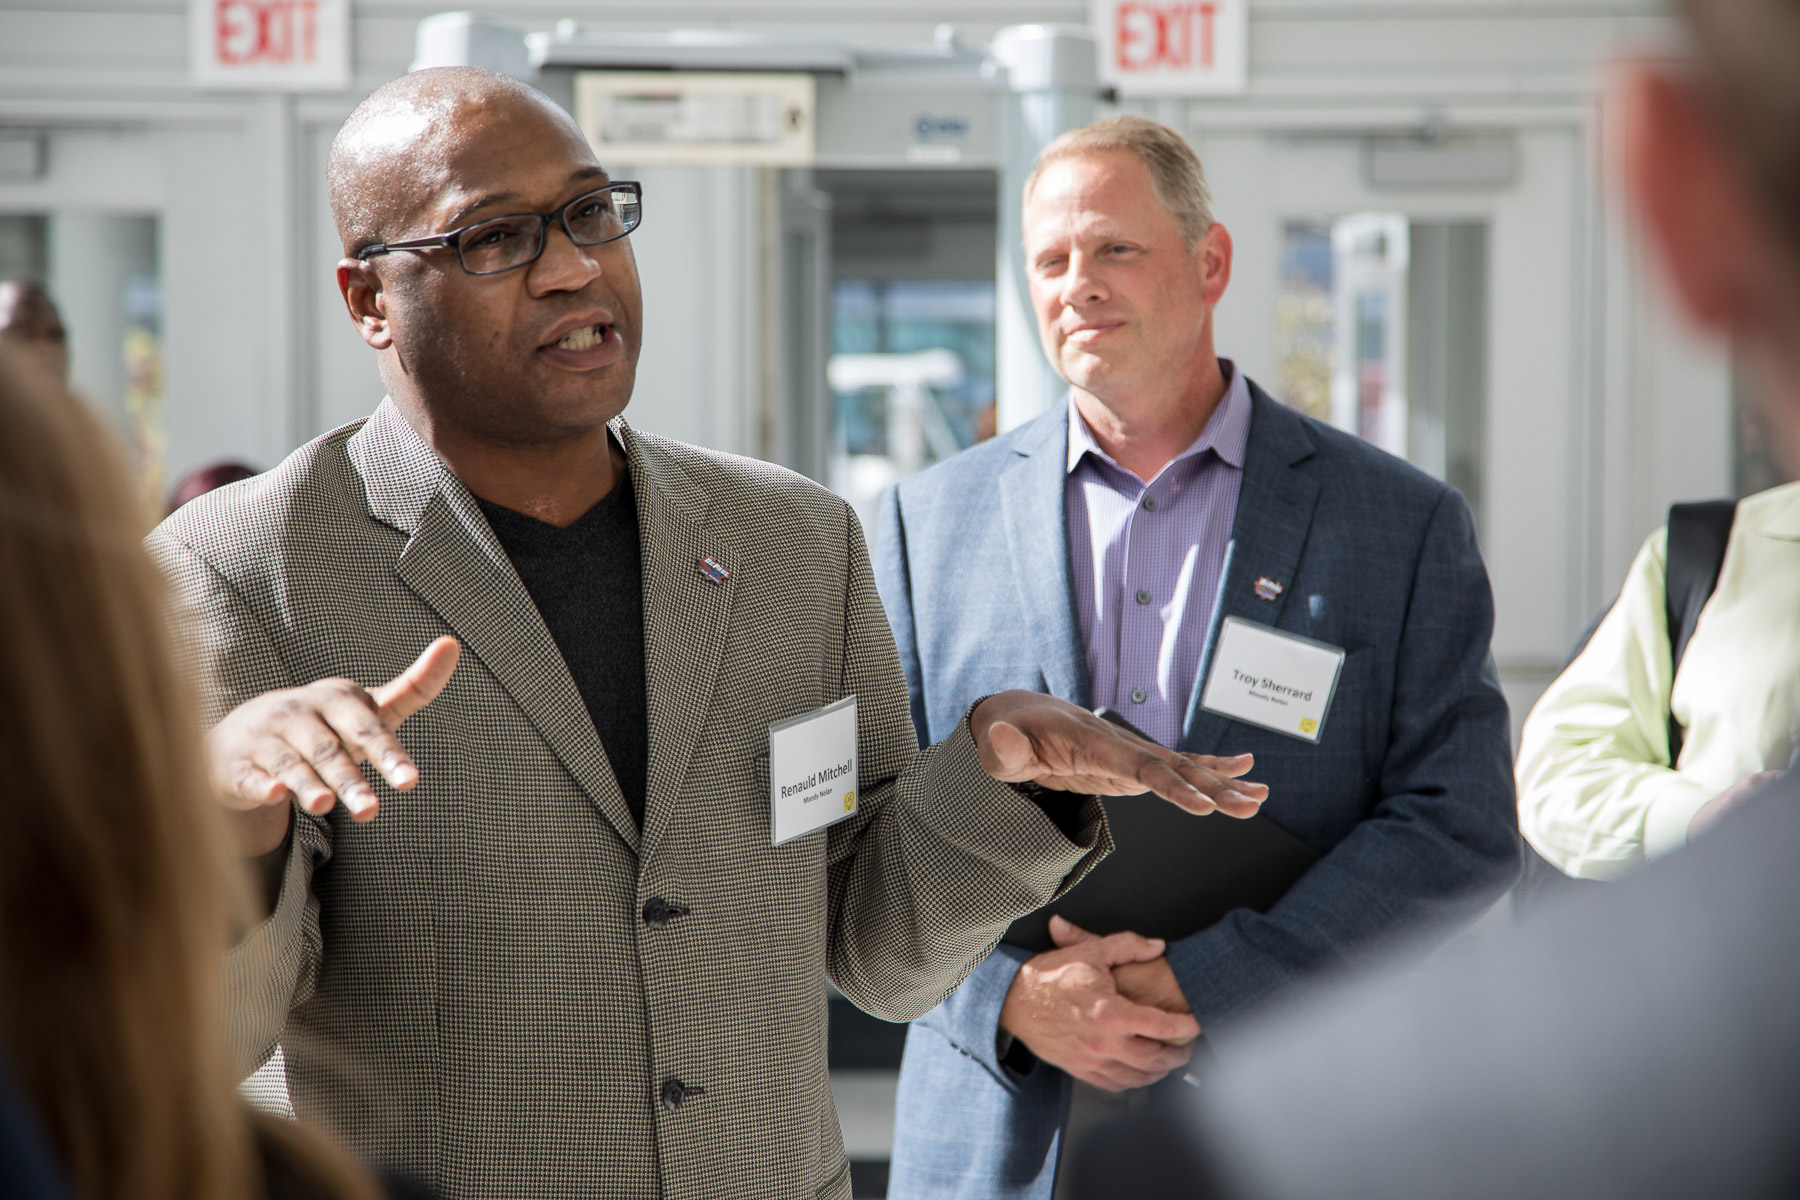 Renauld Mitchell, partner and director of operations in Chicago and Washington for Moody Nolan, told attendees about how the arena was designed and constructed. He was joined by Troy Sherrard (right) from Moody Nolan. (DePaul University/Jeff Carrion)